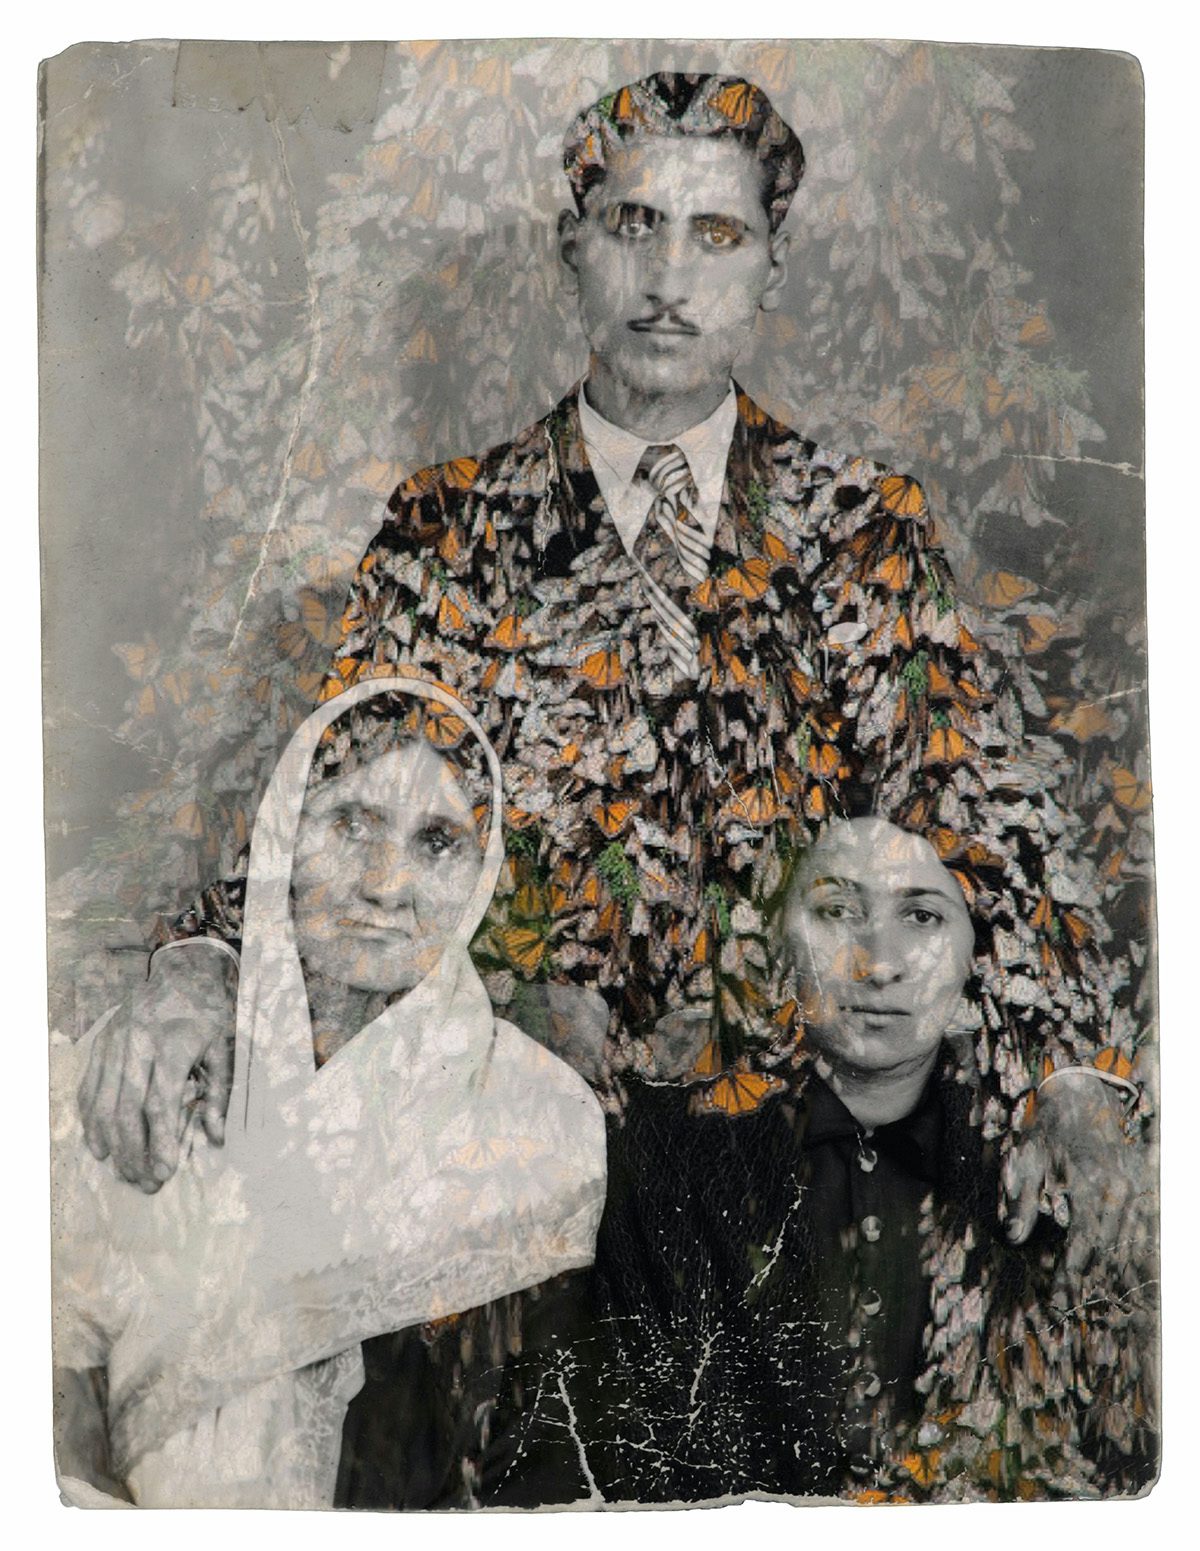 Image by Nazli Abbaspour using an old family photo of two women, one wearing a veil, in the foreground and the man in the background with a hand on each woman's shoulder, covered with an orange floral translucent layer over the photograph